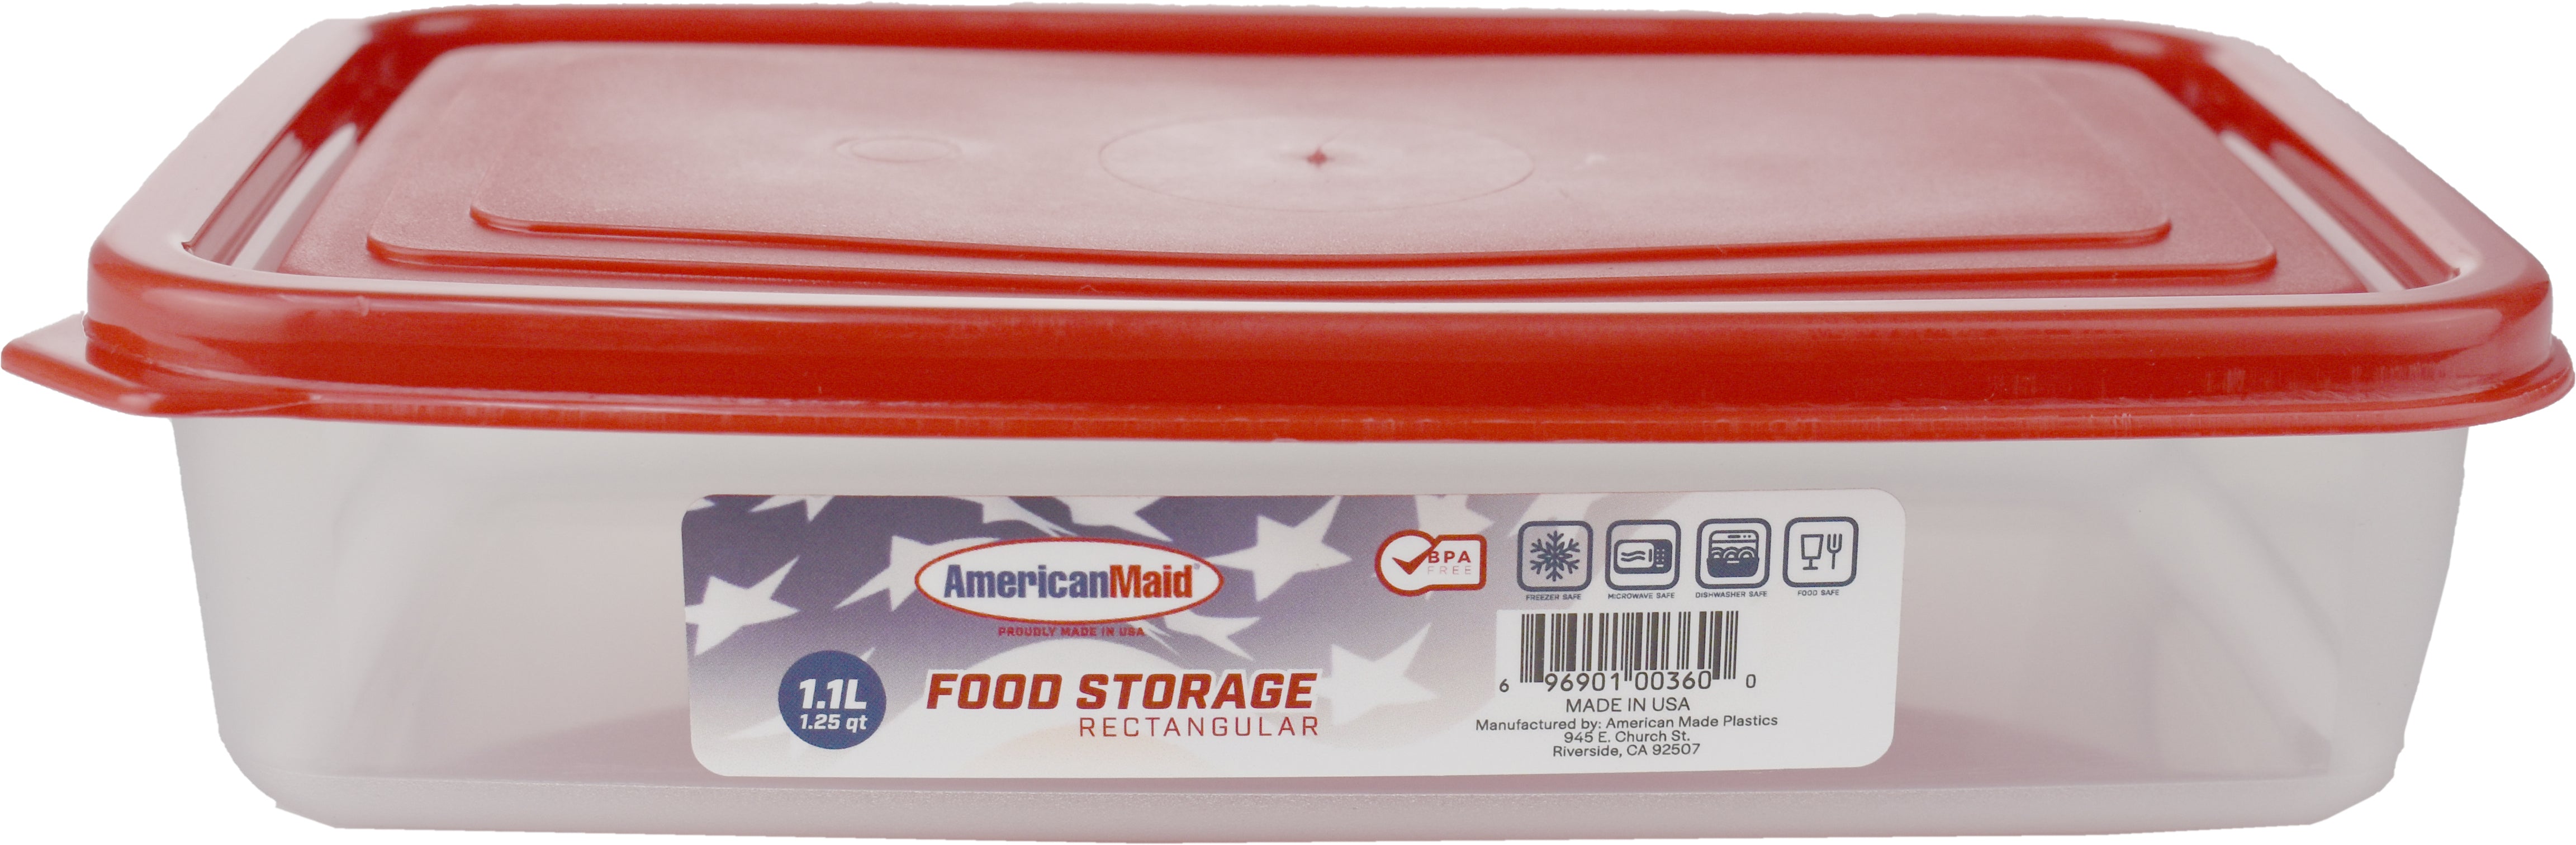 Rubbermaid Food Storage Egg Storage Containers